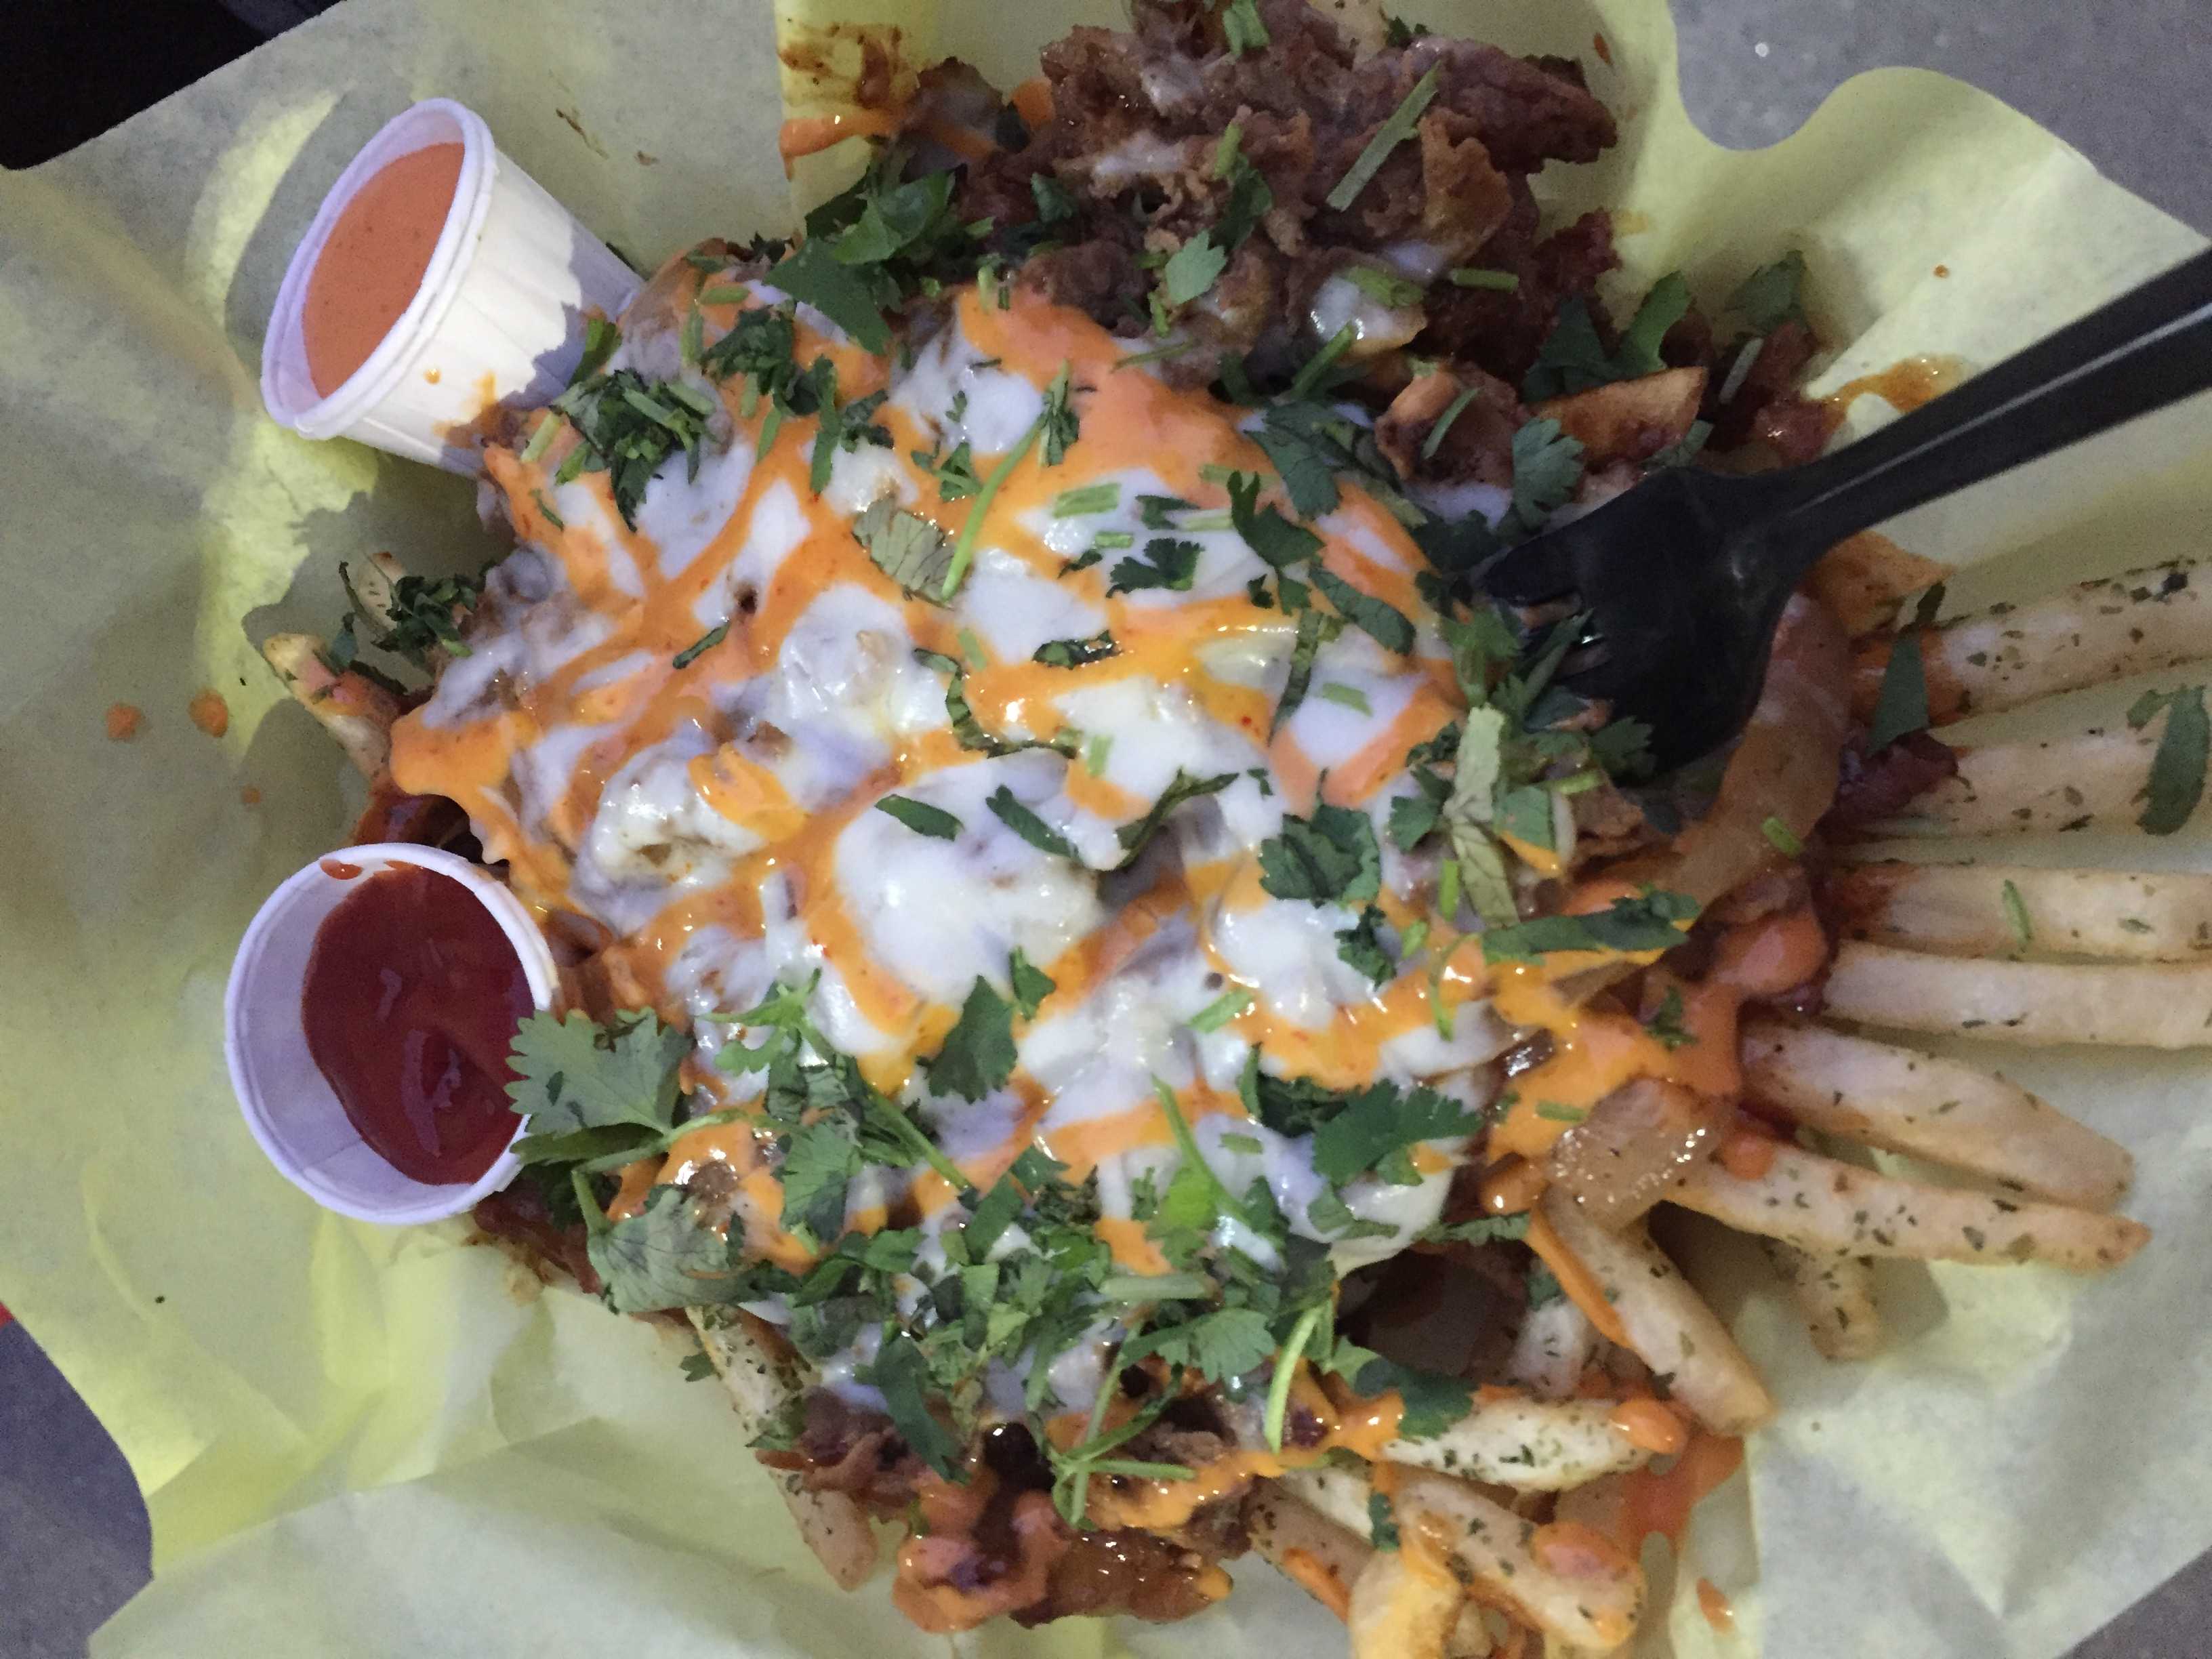 Fries pictured loaded with sauces and sour cream